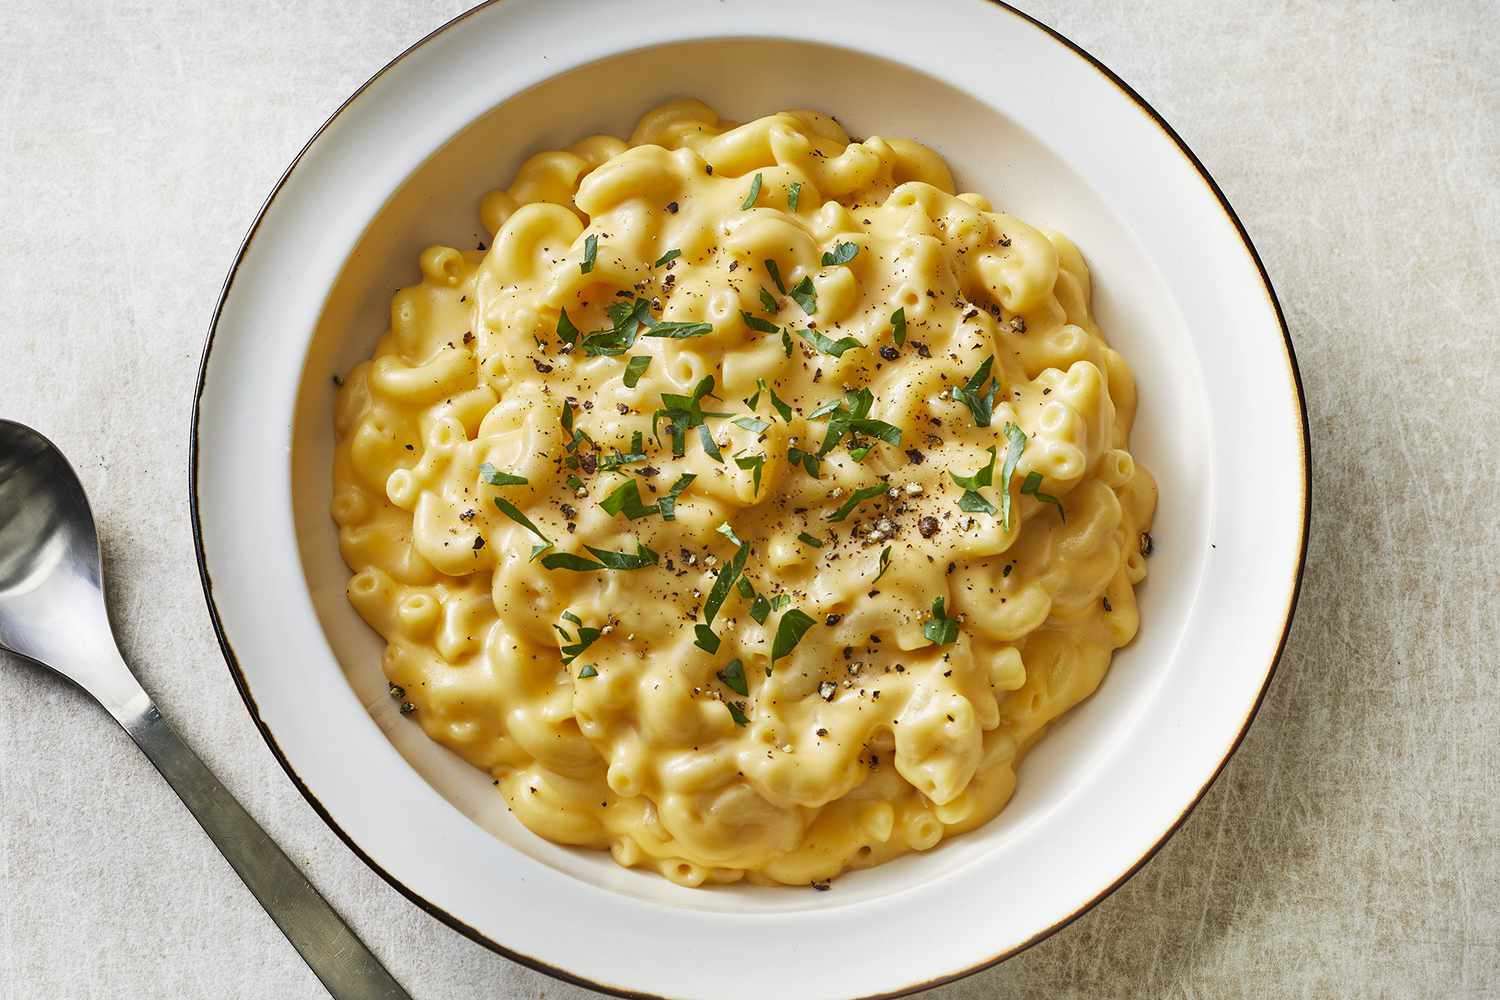 Macaroni and Cheese dish in plate